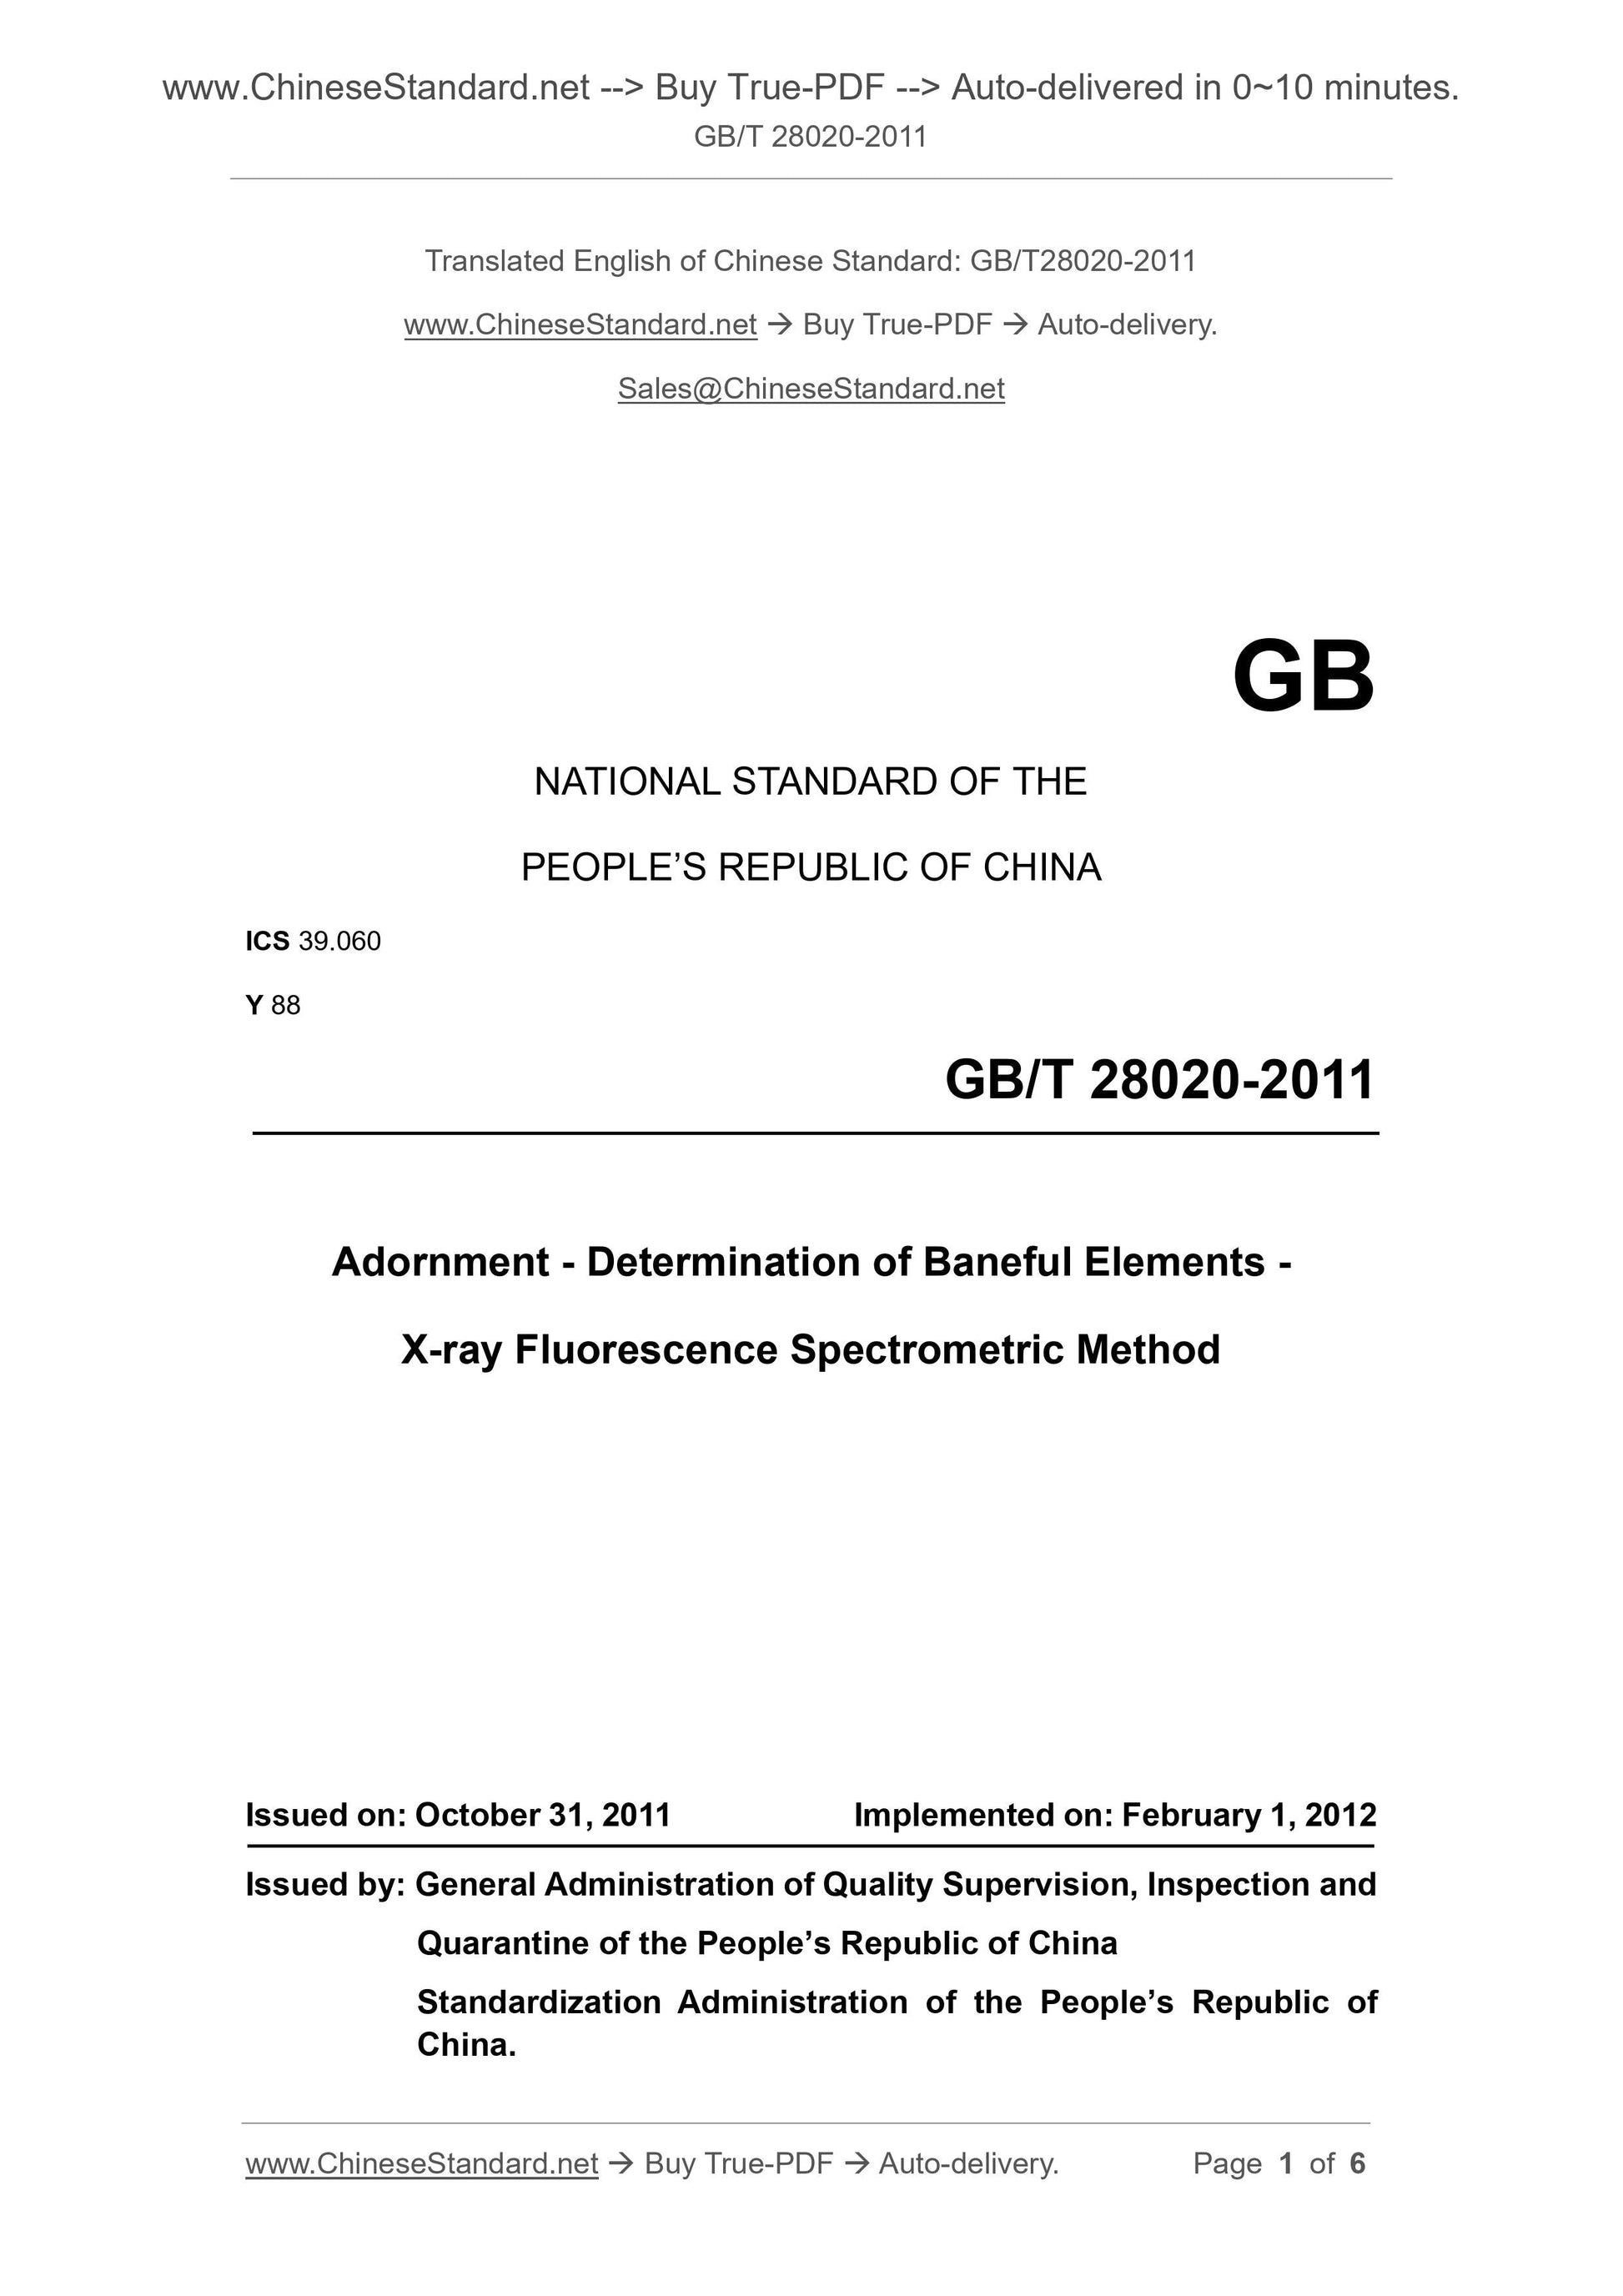 GB/T 28020-2011 Page 1